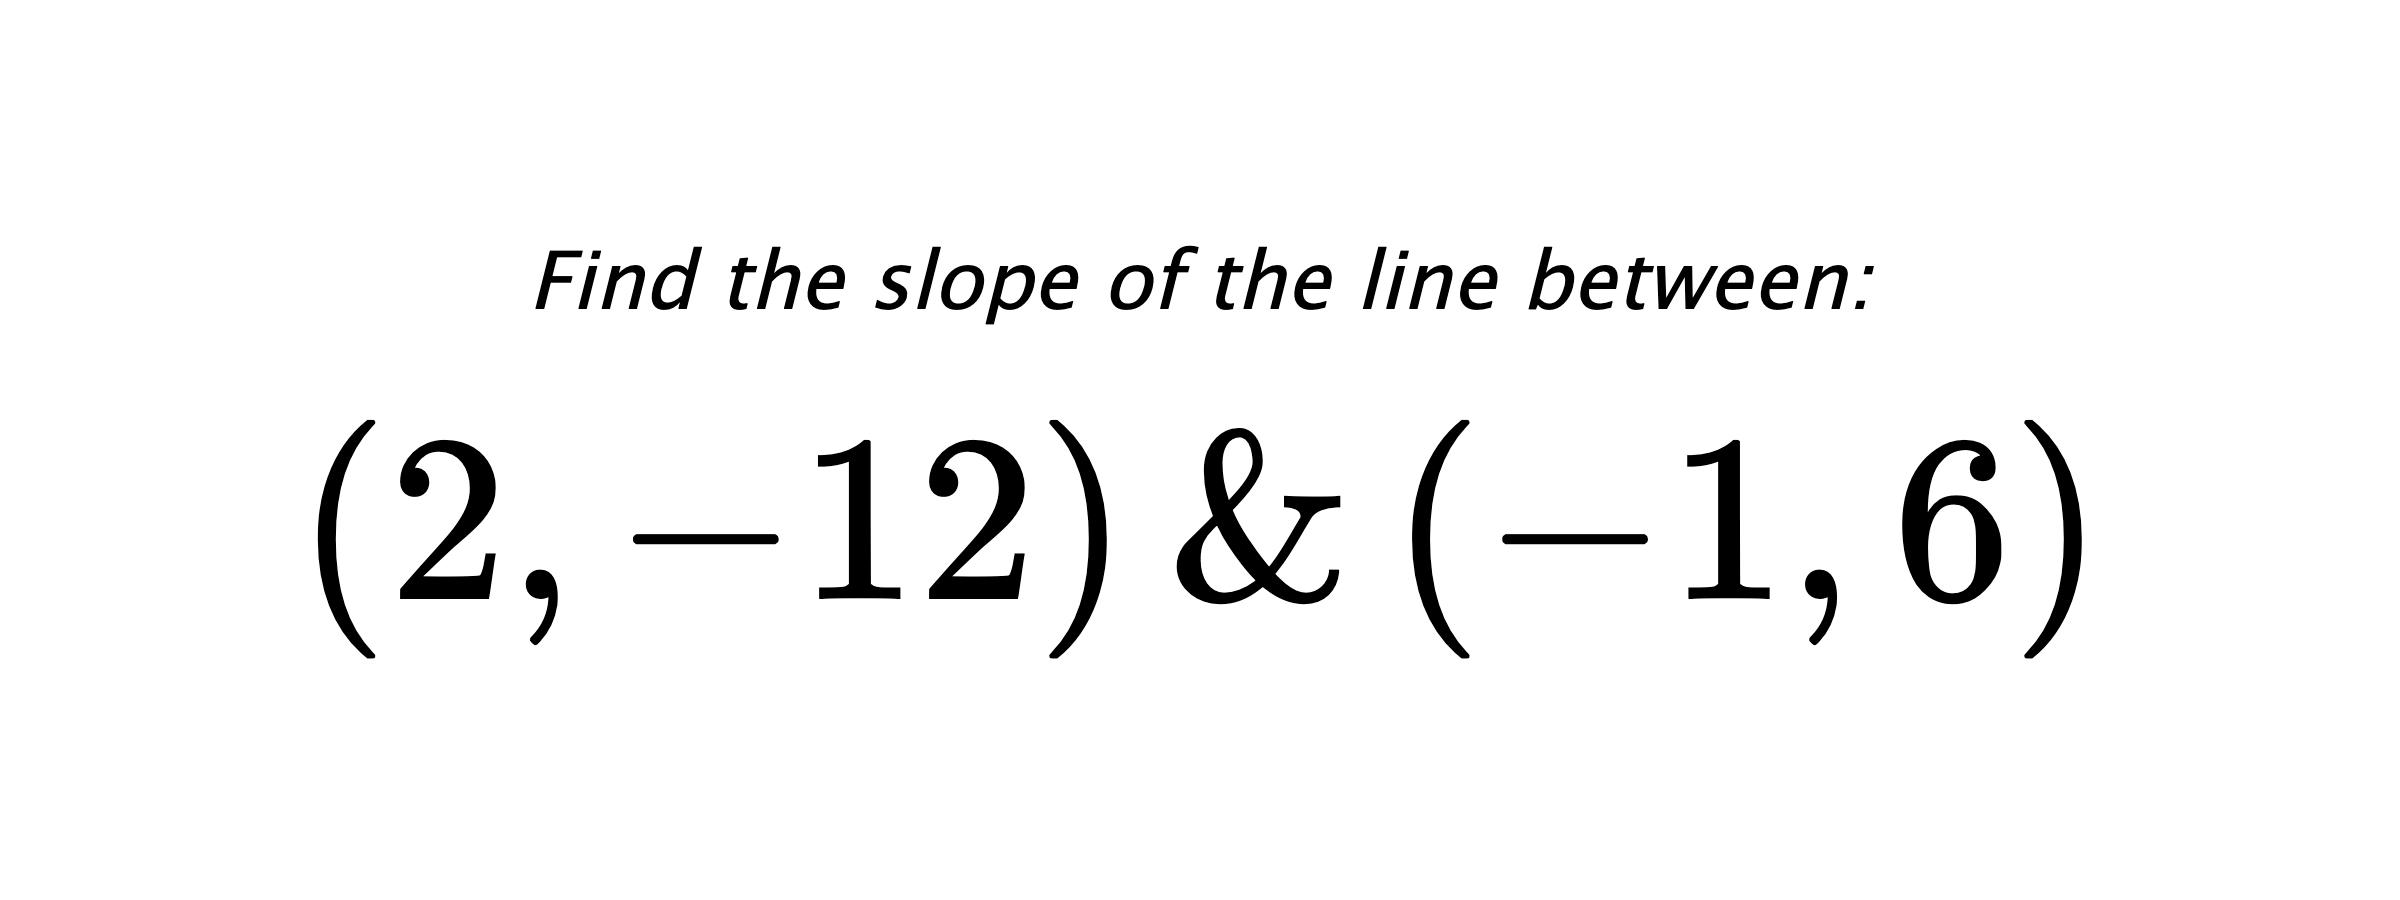 Find the slope of the line between: $ (2,-12) \hspace{0.5cm} \text{&} \hspace{0.5cm} (-1,6) $